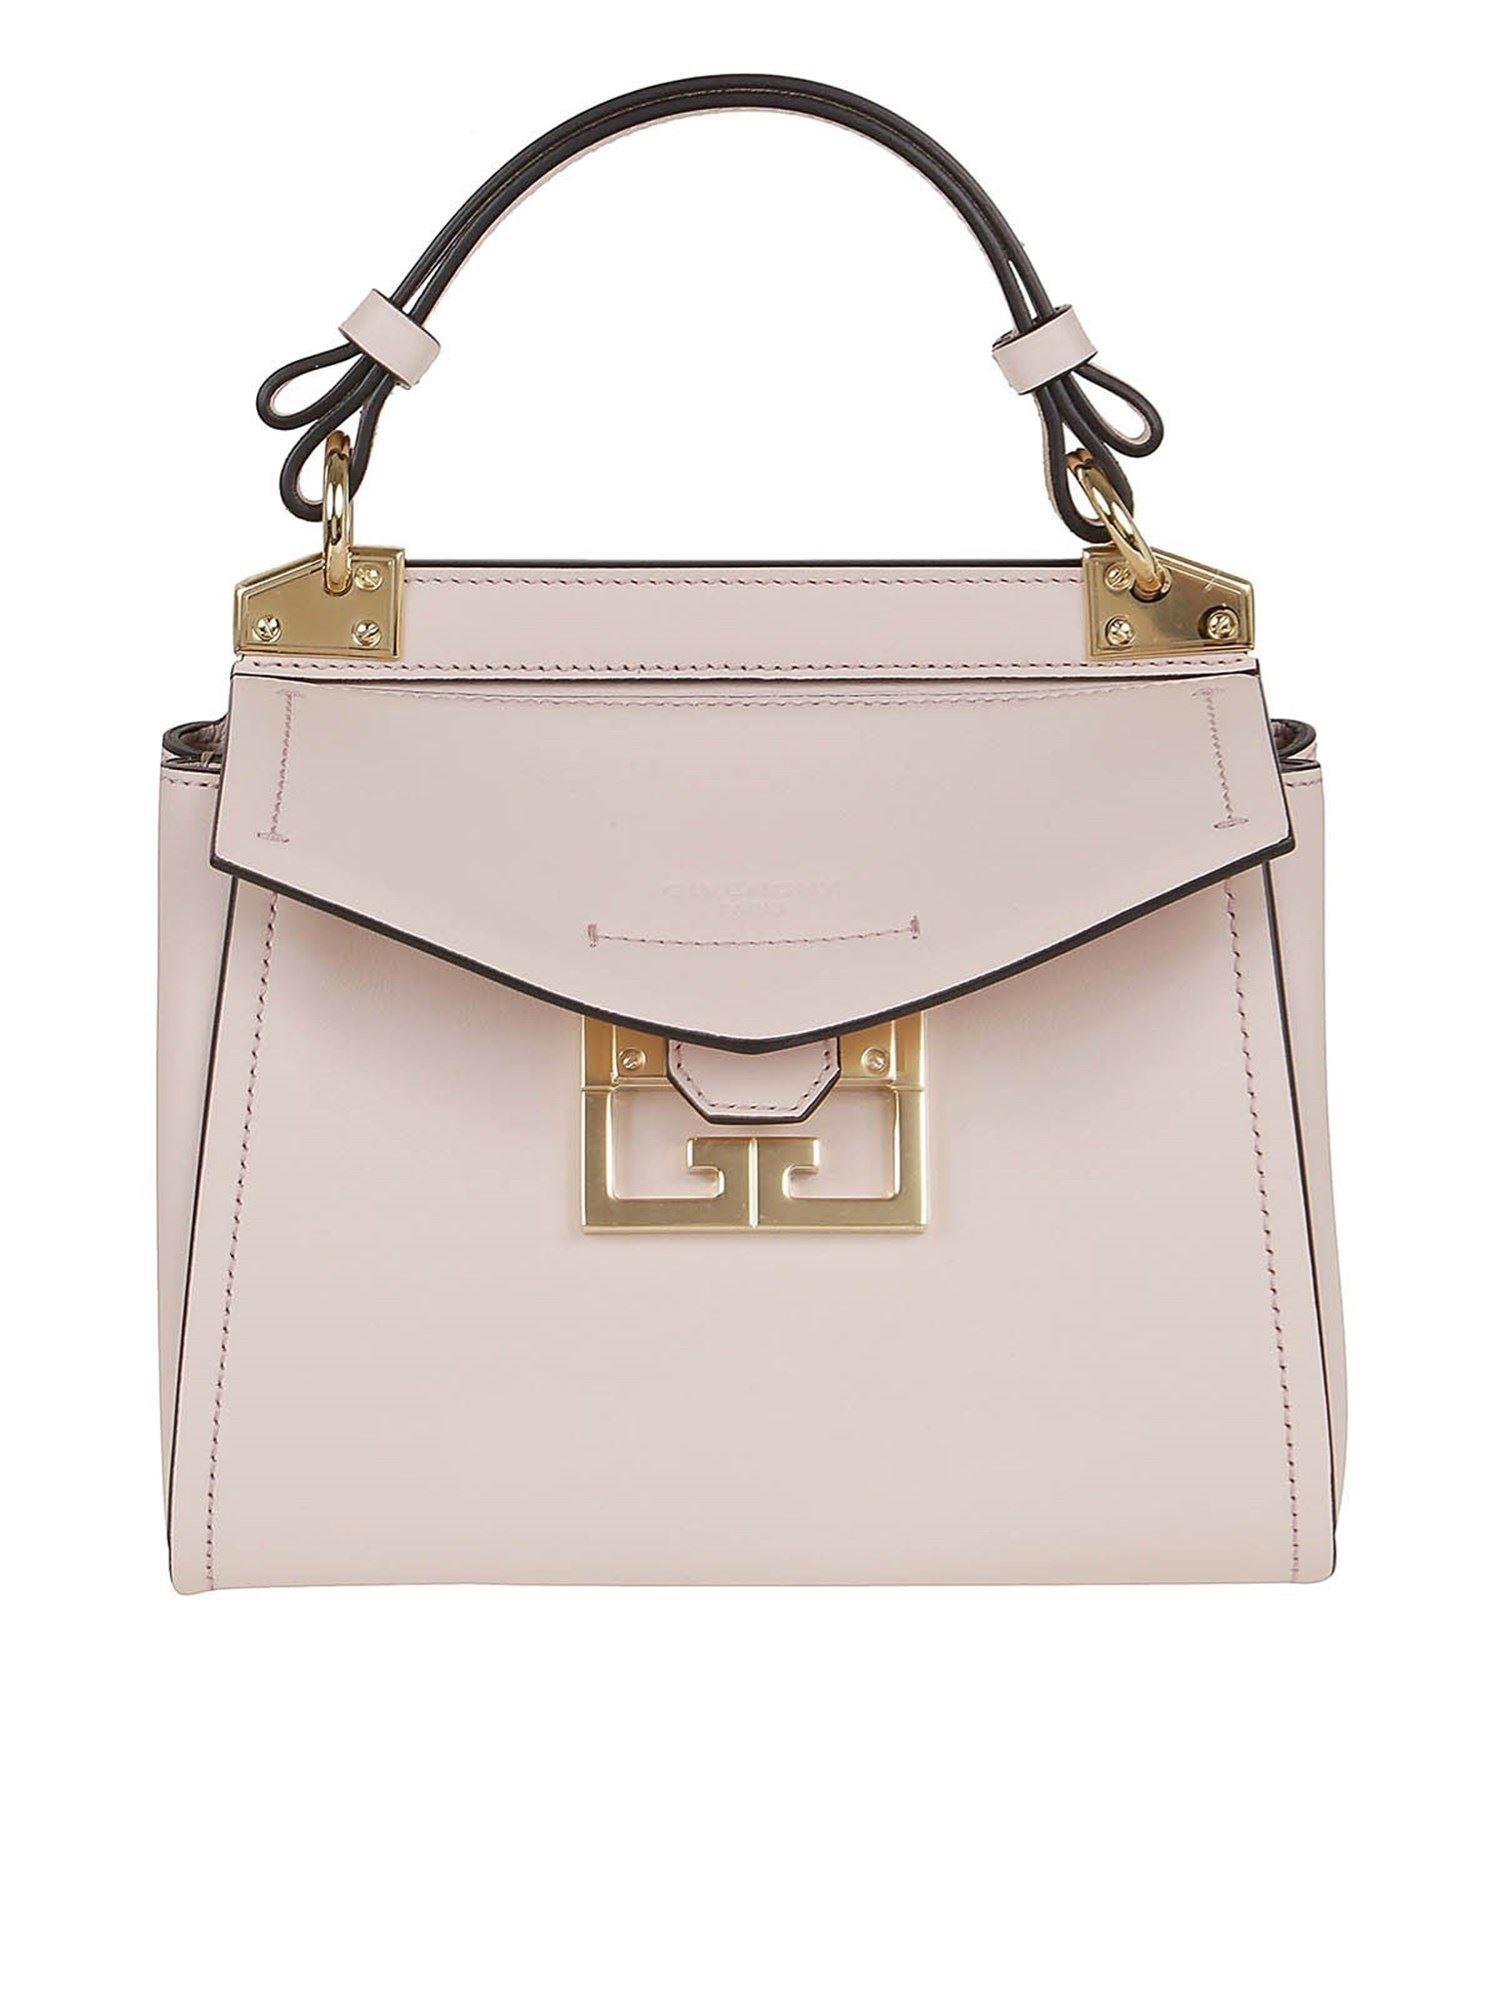 Givenchy Mystic Mini Bag in Pink - Lyst